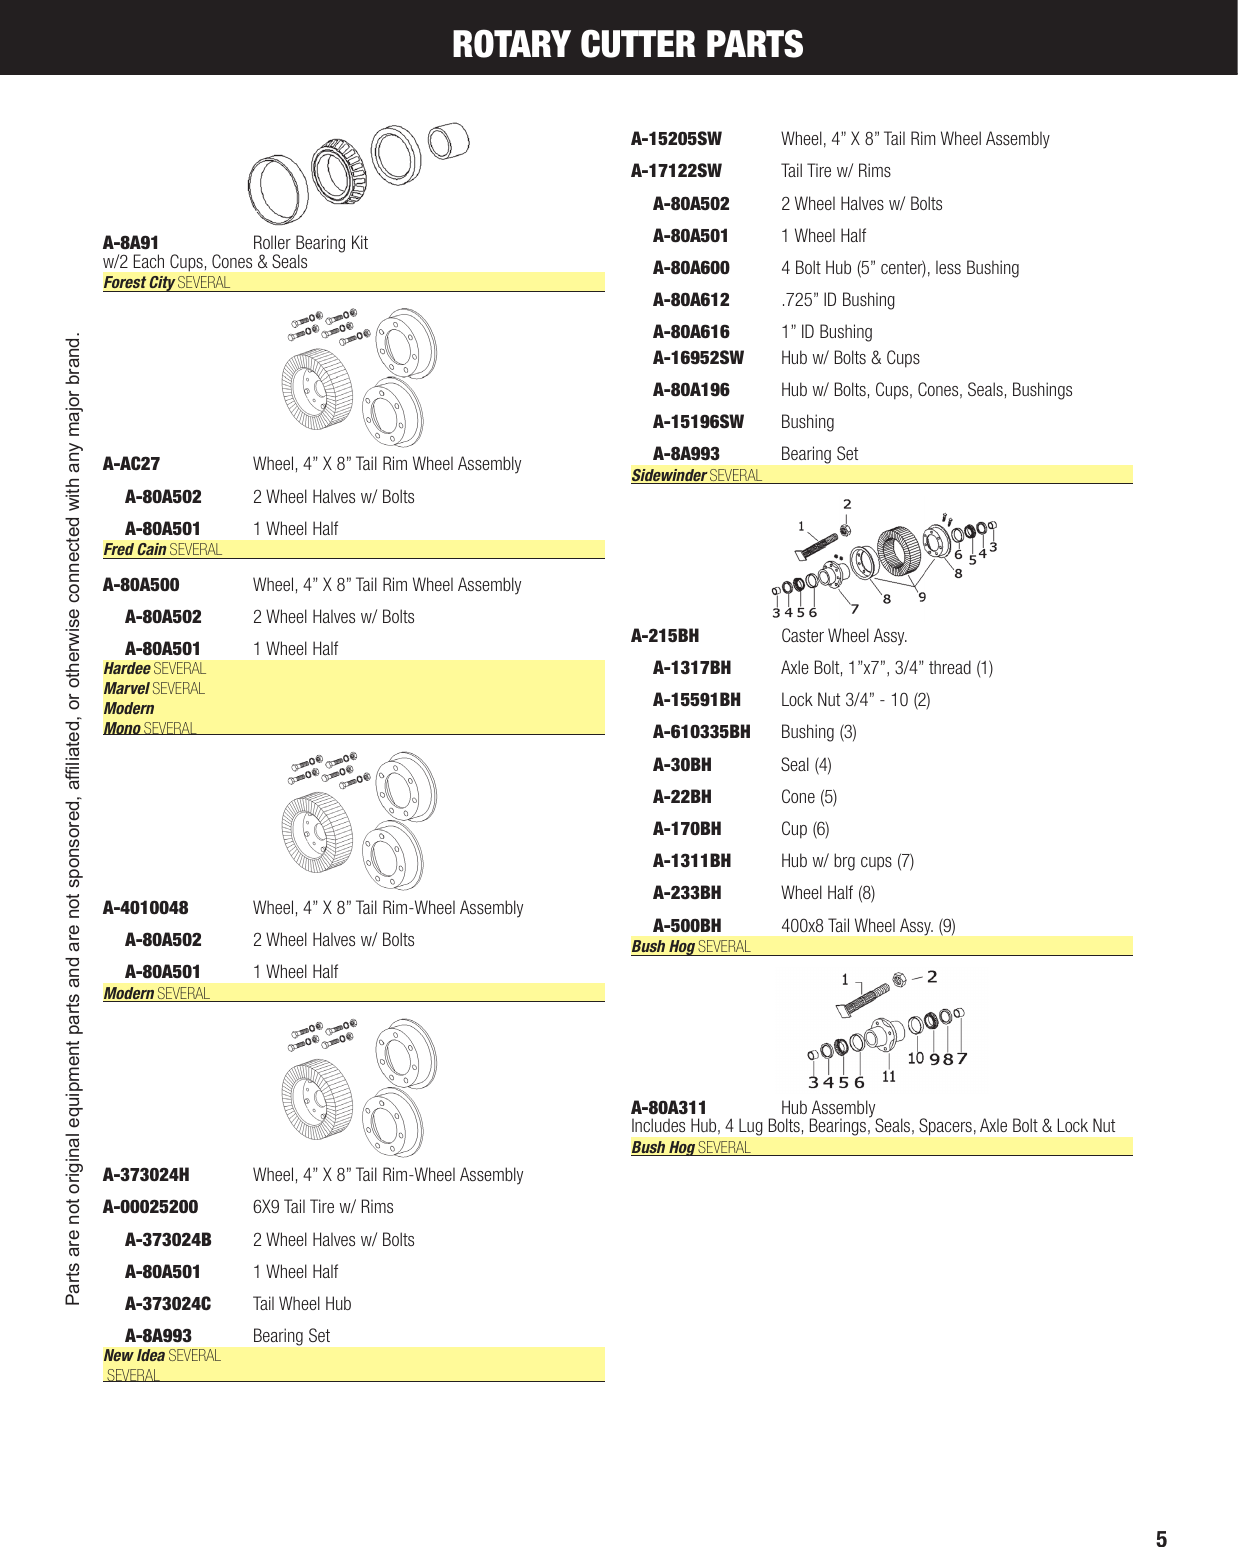 Page 5 of 8 - Hay Tool - Rotary Cutter Parts  !! Rotary-cutter-parts